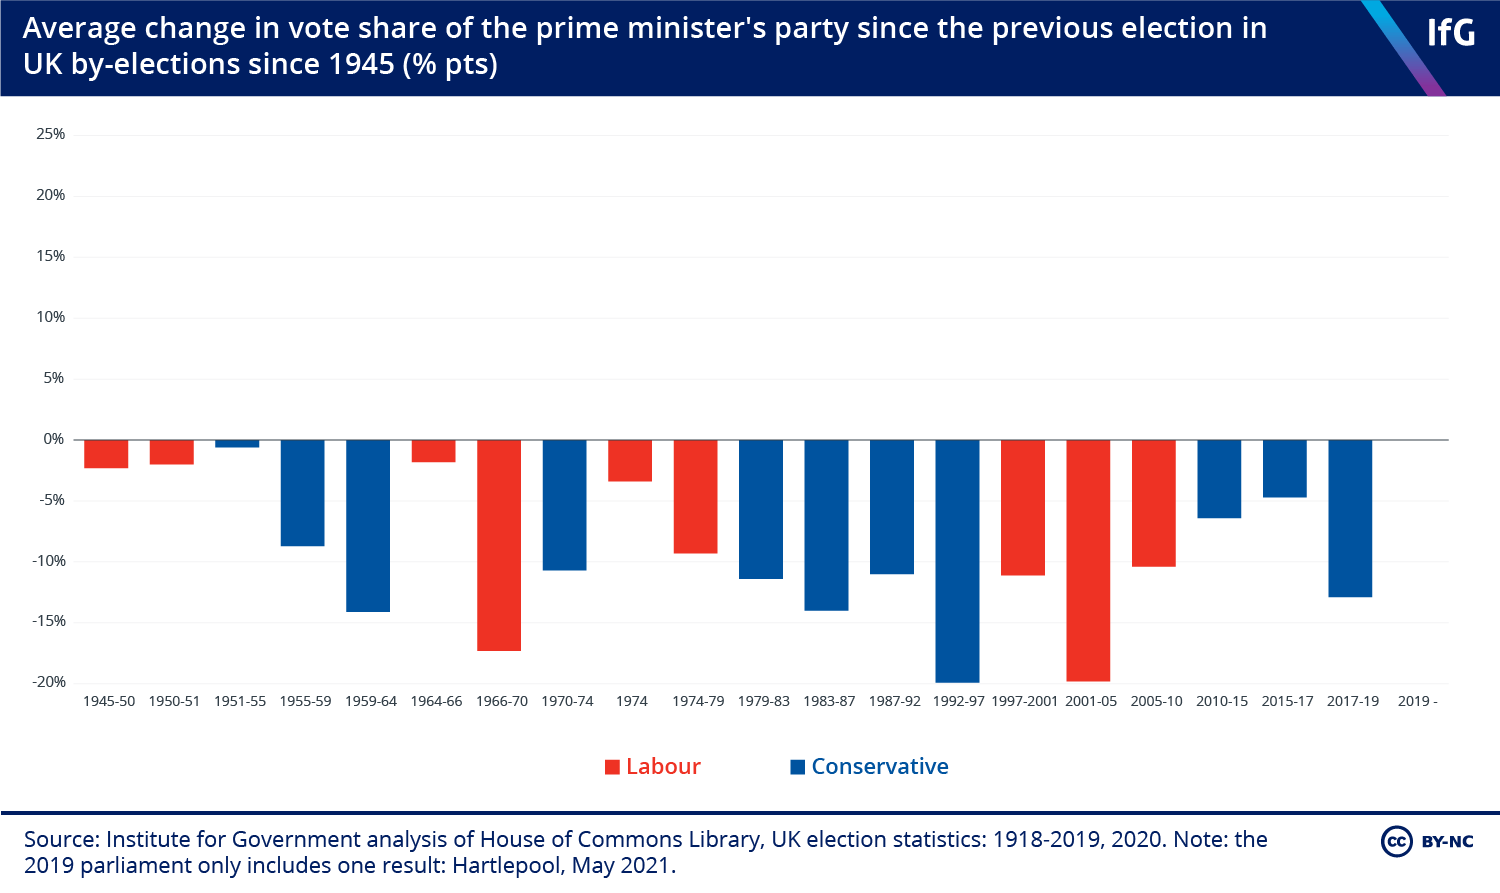 Average change in vote share of the prime minister's party since the previous election in UK by-elections